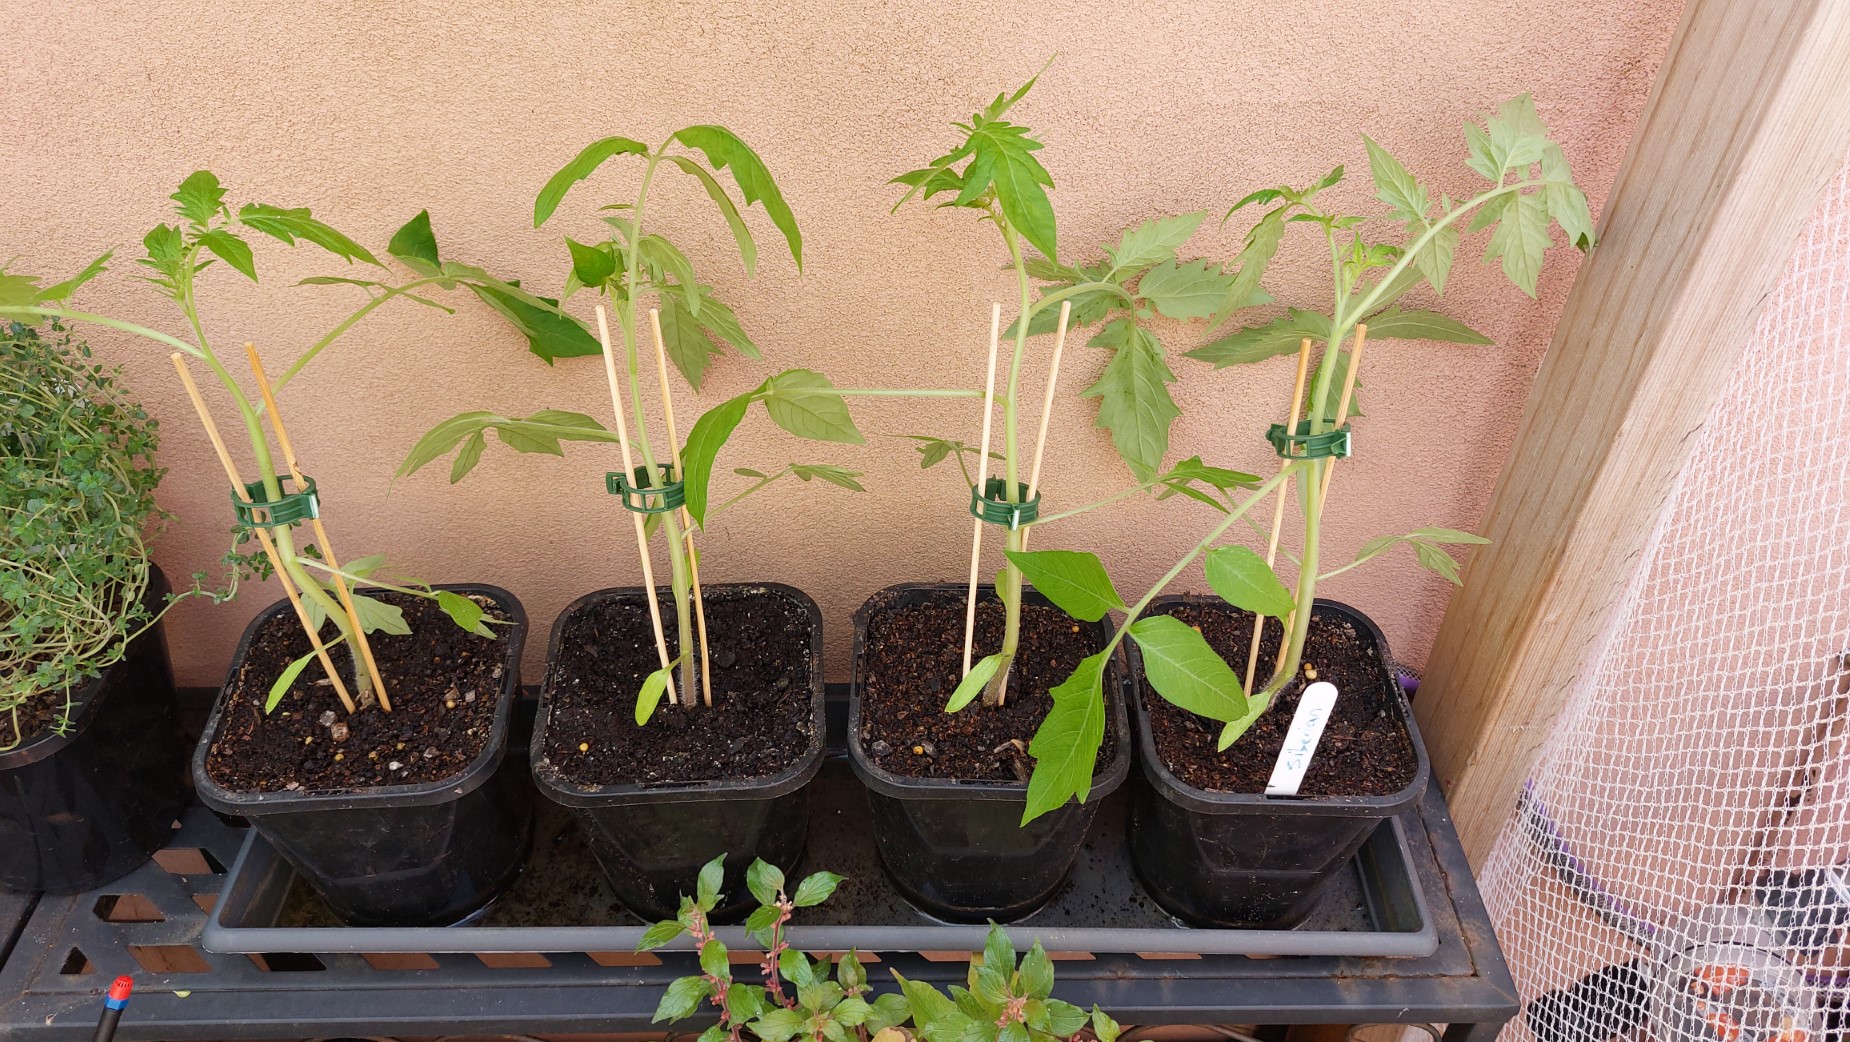 Staked tomatoes